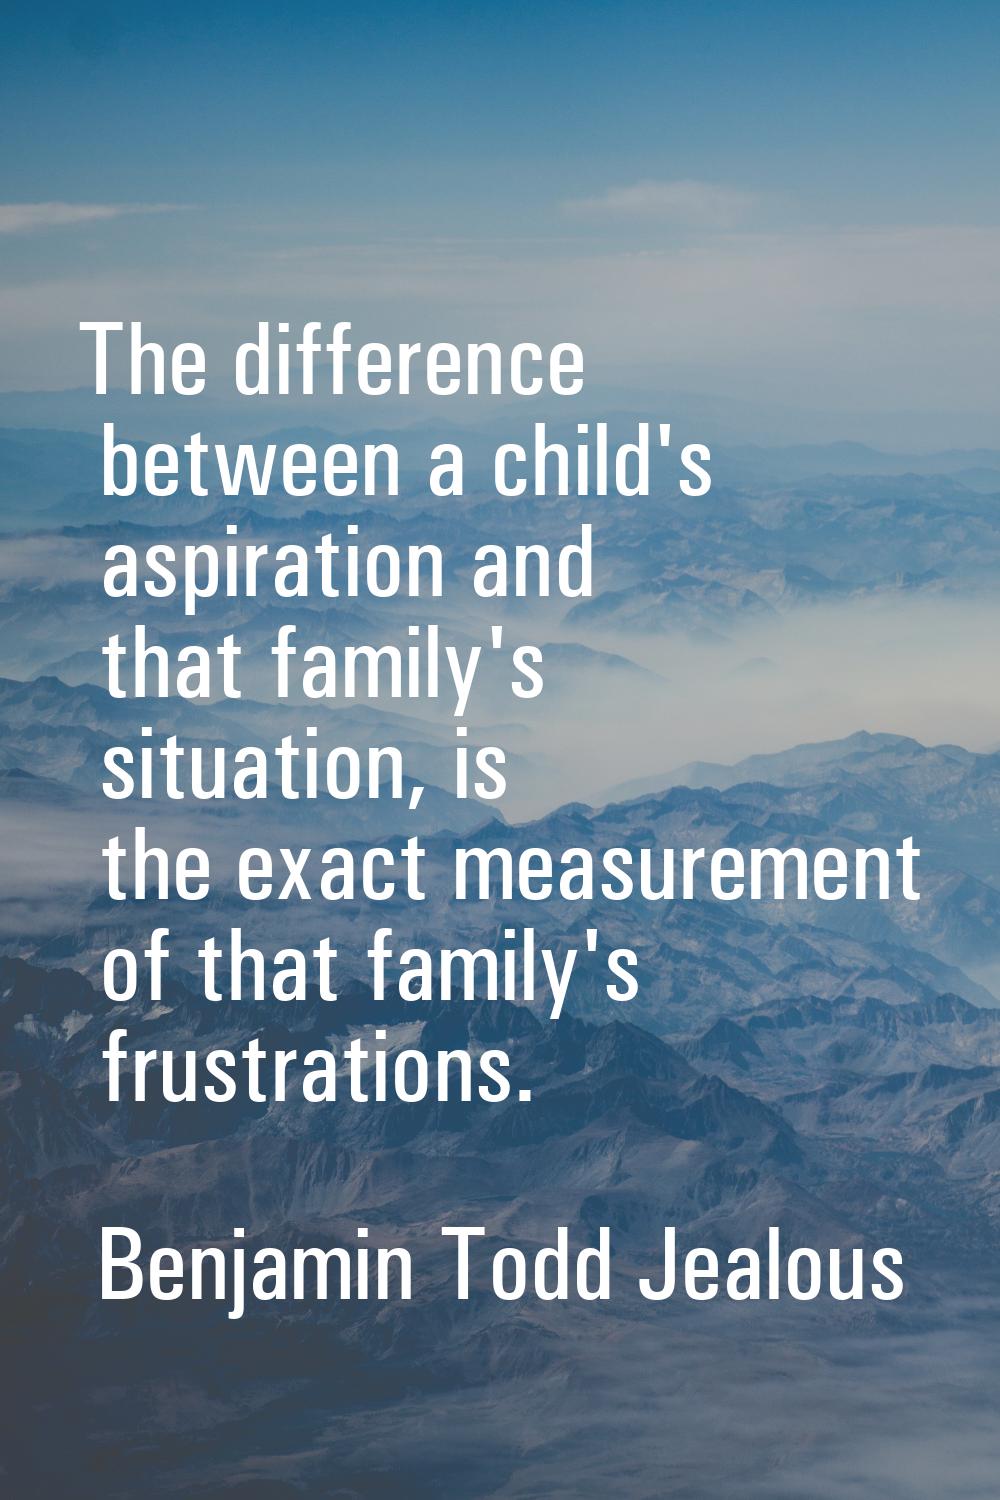 The difference between a child's aspiration and that family's situation, is the exact measurement o